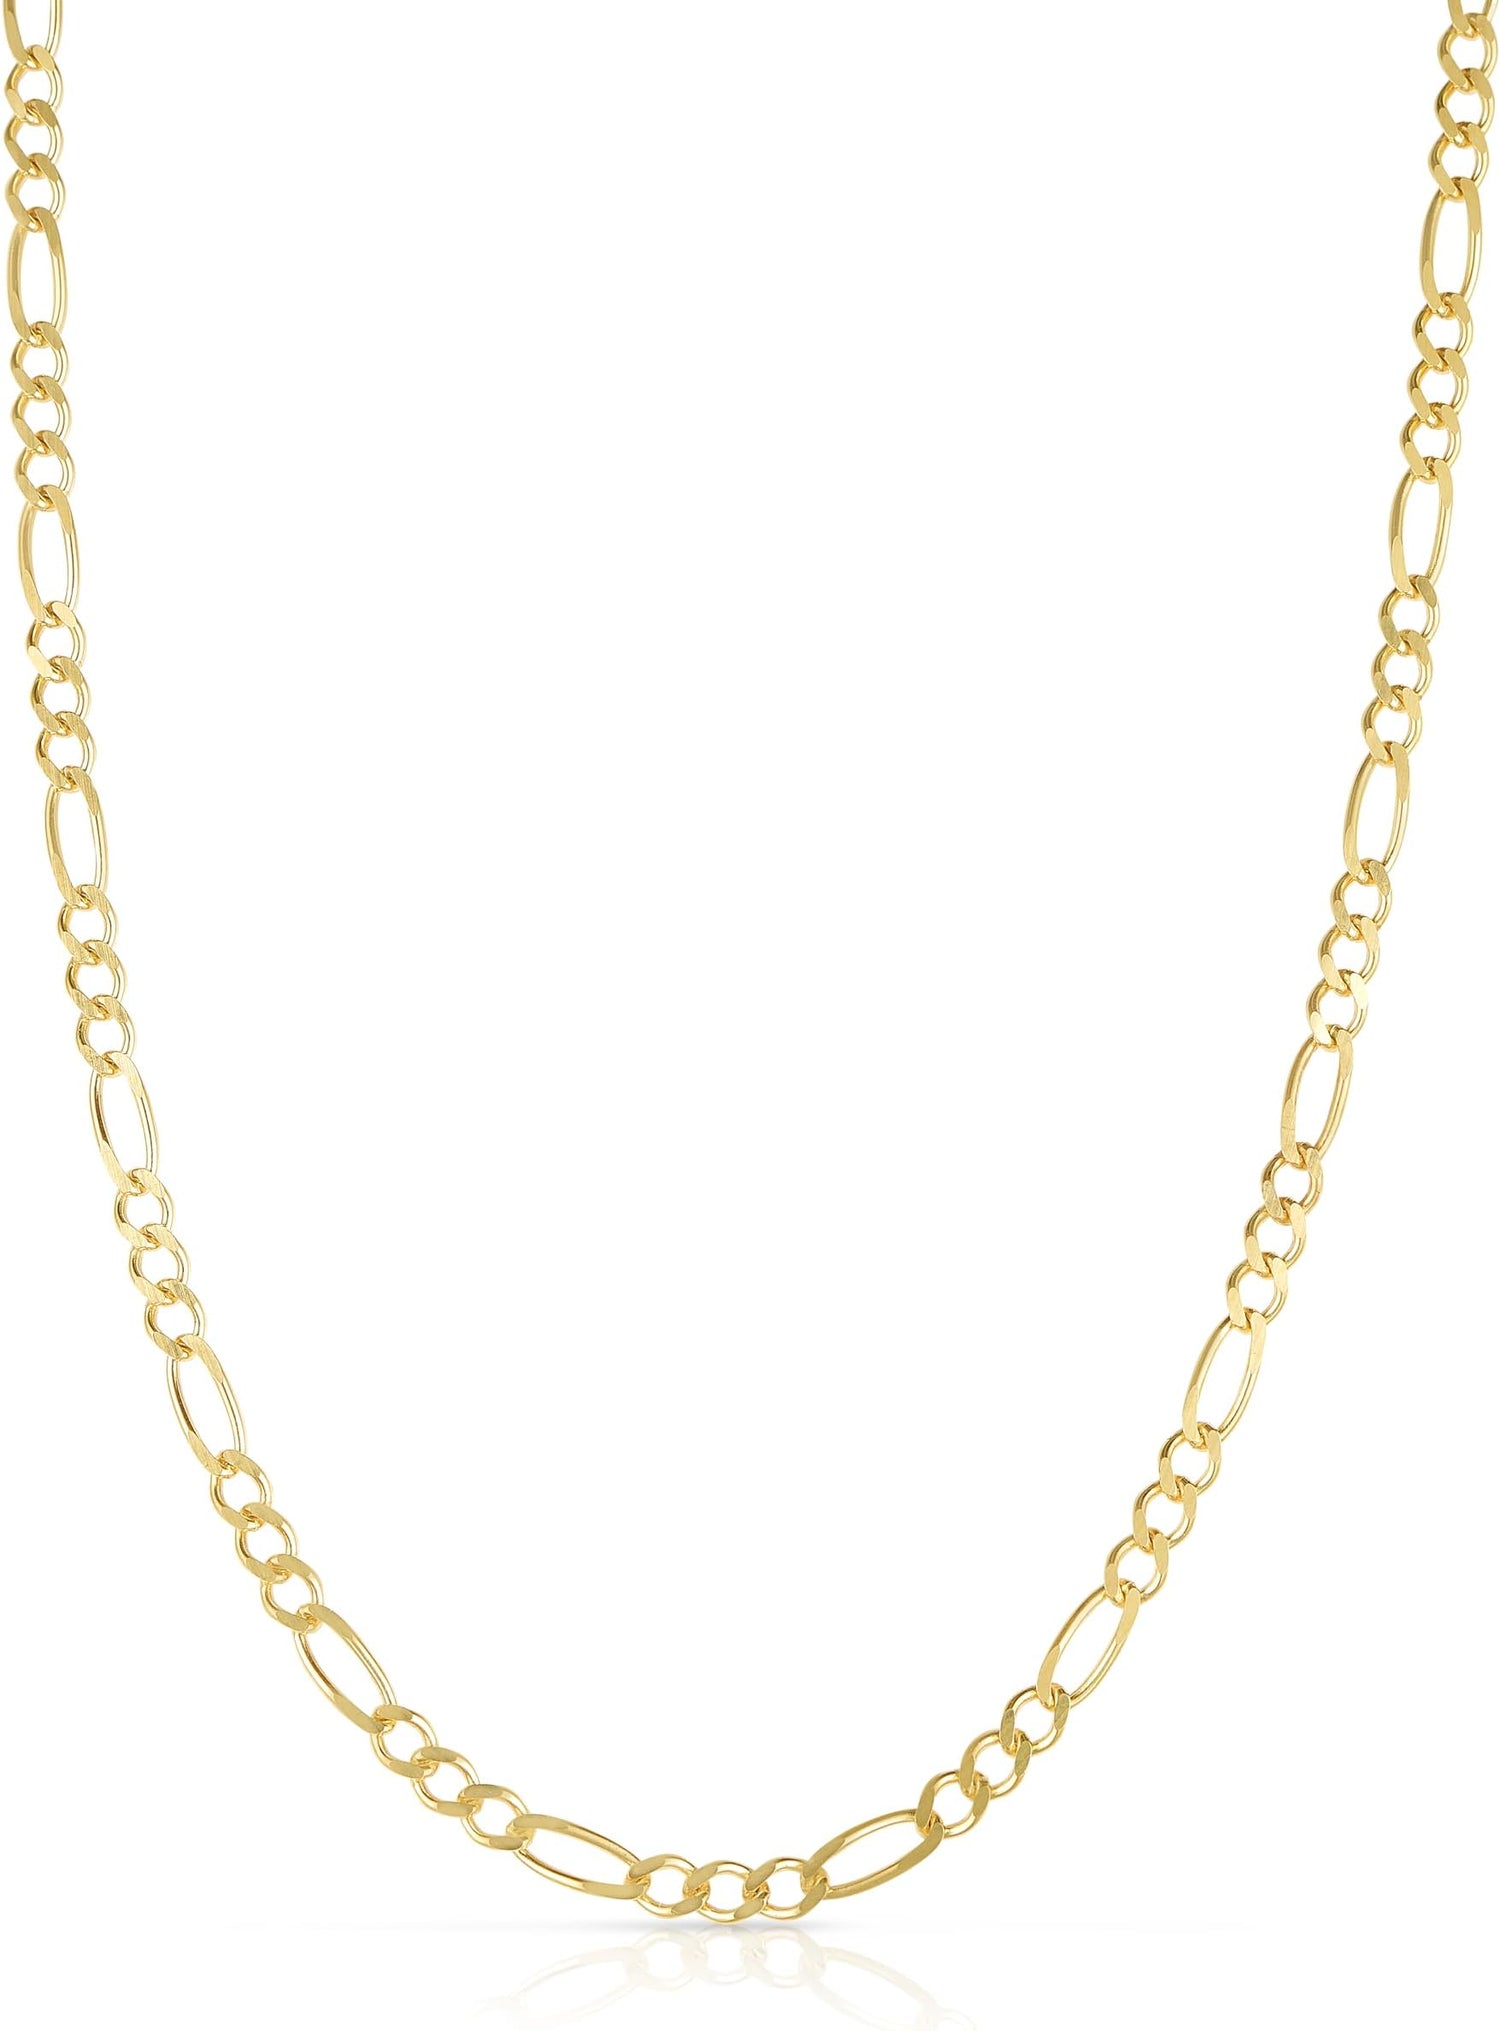 10k Yellow Gold 2mm Solid Figaro Chain Link Necklace - 16 inch